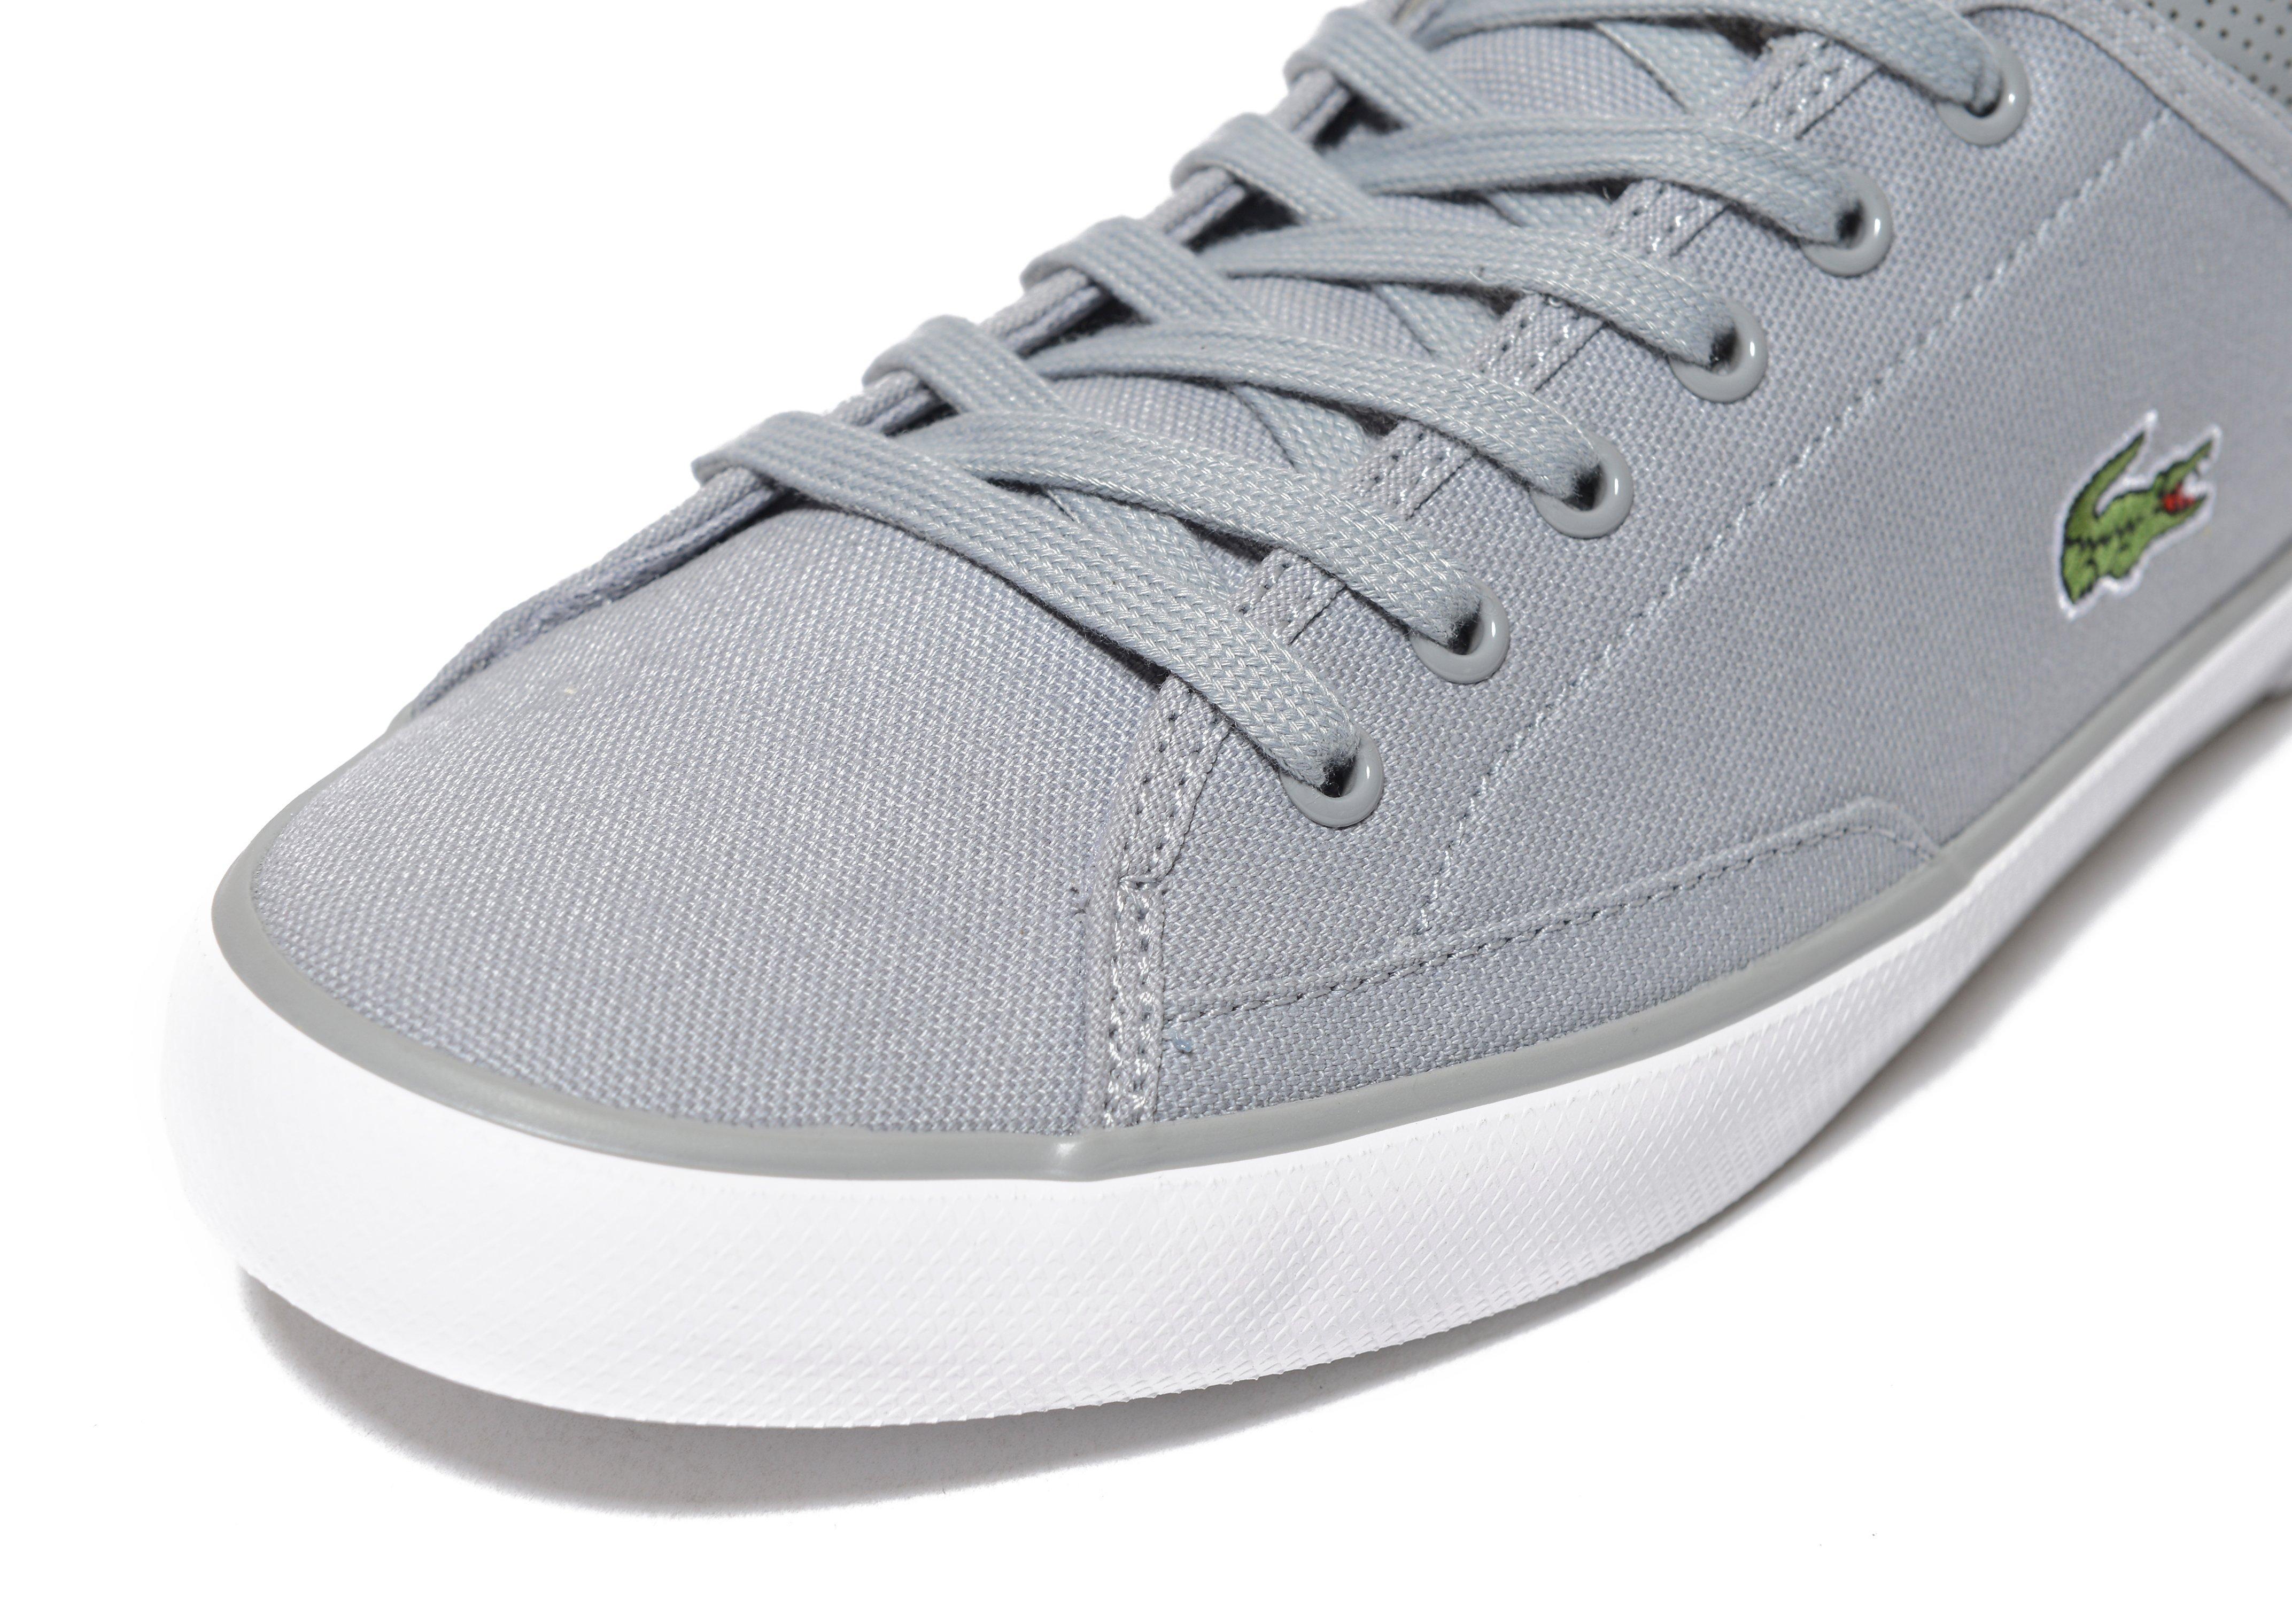 Lacoste Leather Angha 217 in Grey/Tan 